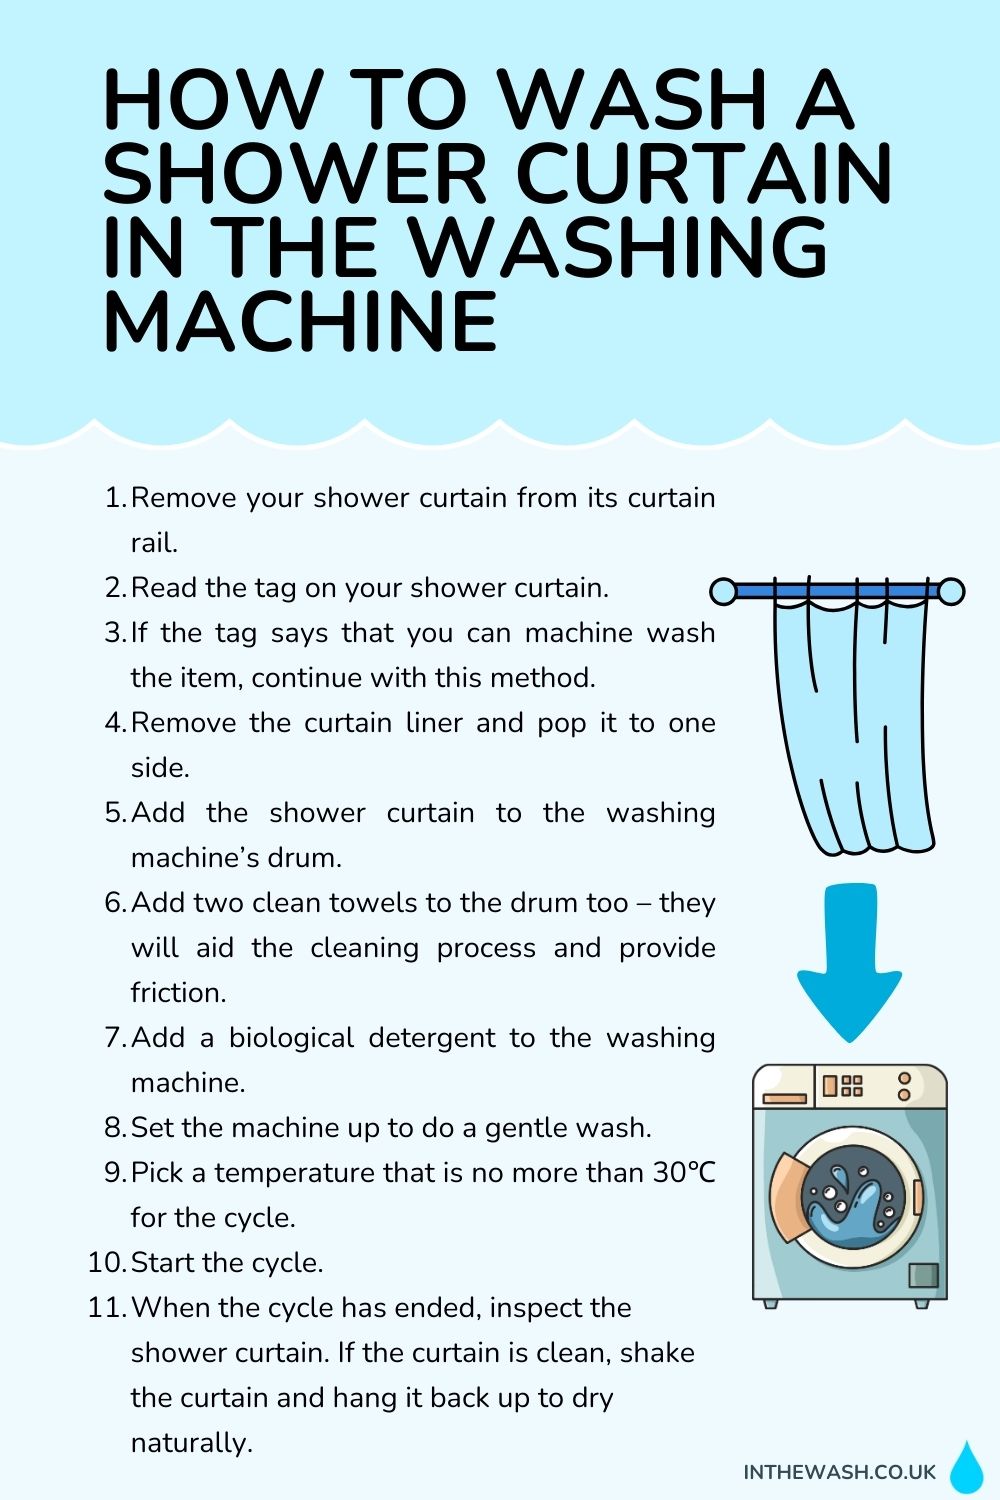 How to Wash a Shower Curtain